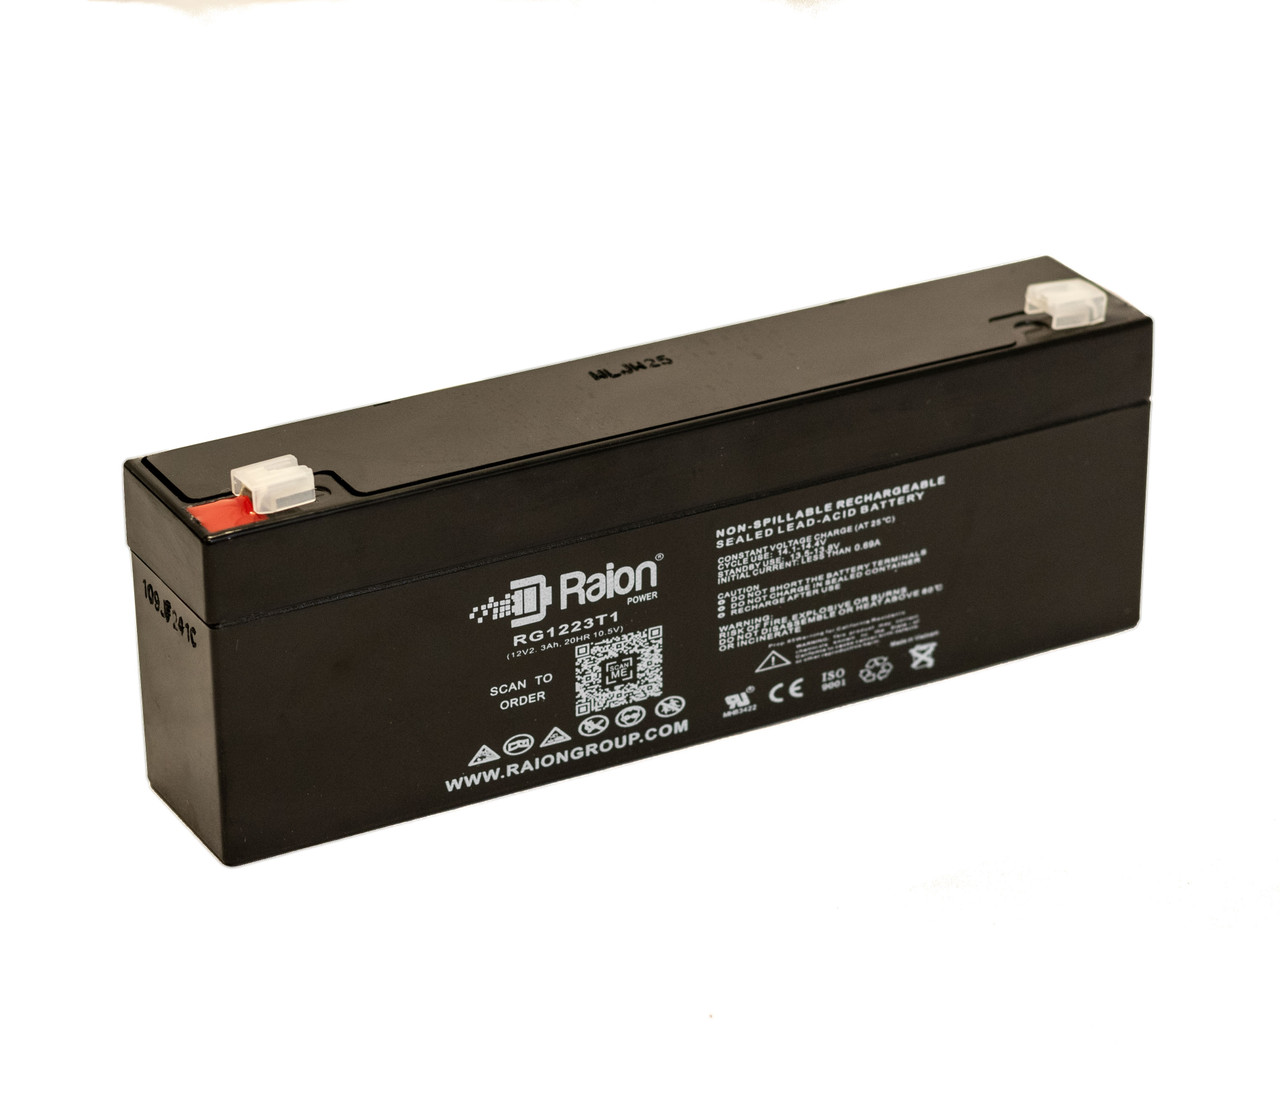 Raion Power RG1223T1 Replacement Battery for Spacelabs Medical 2446 System Recorder